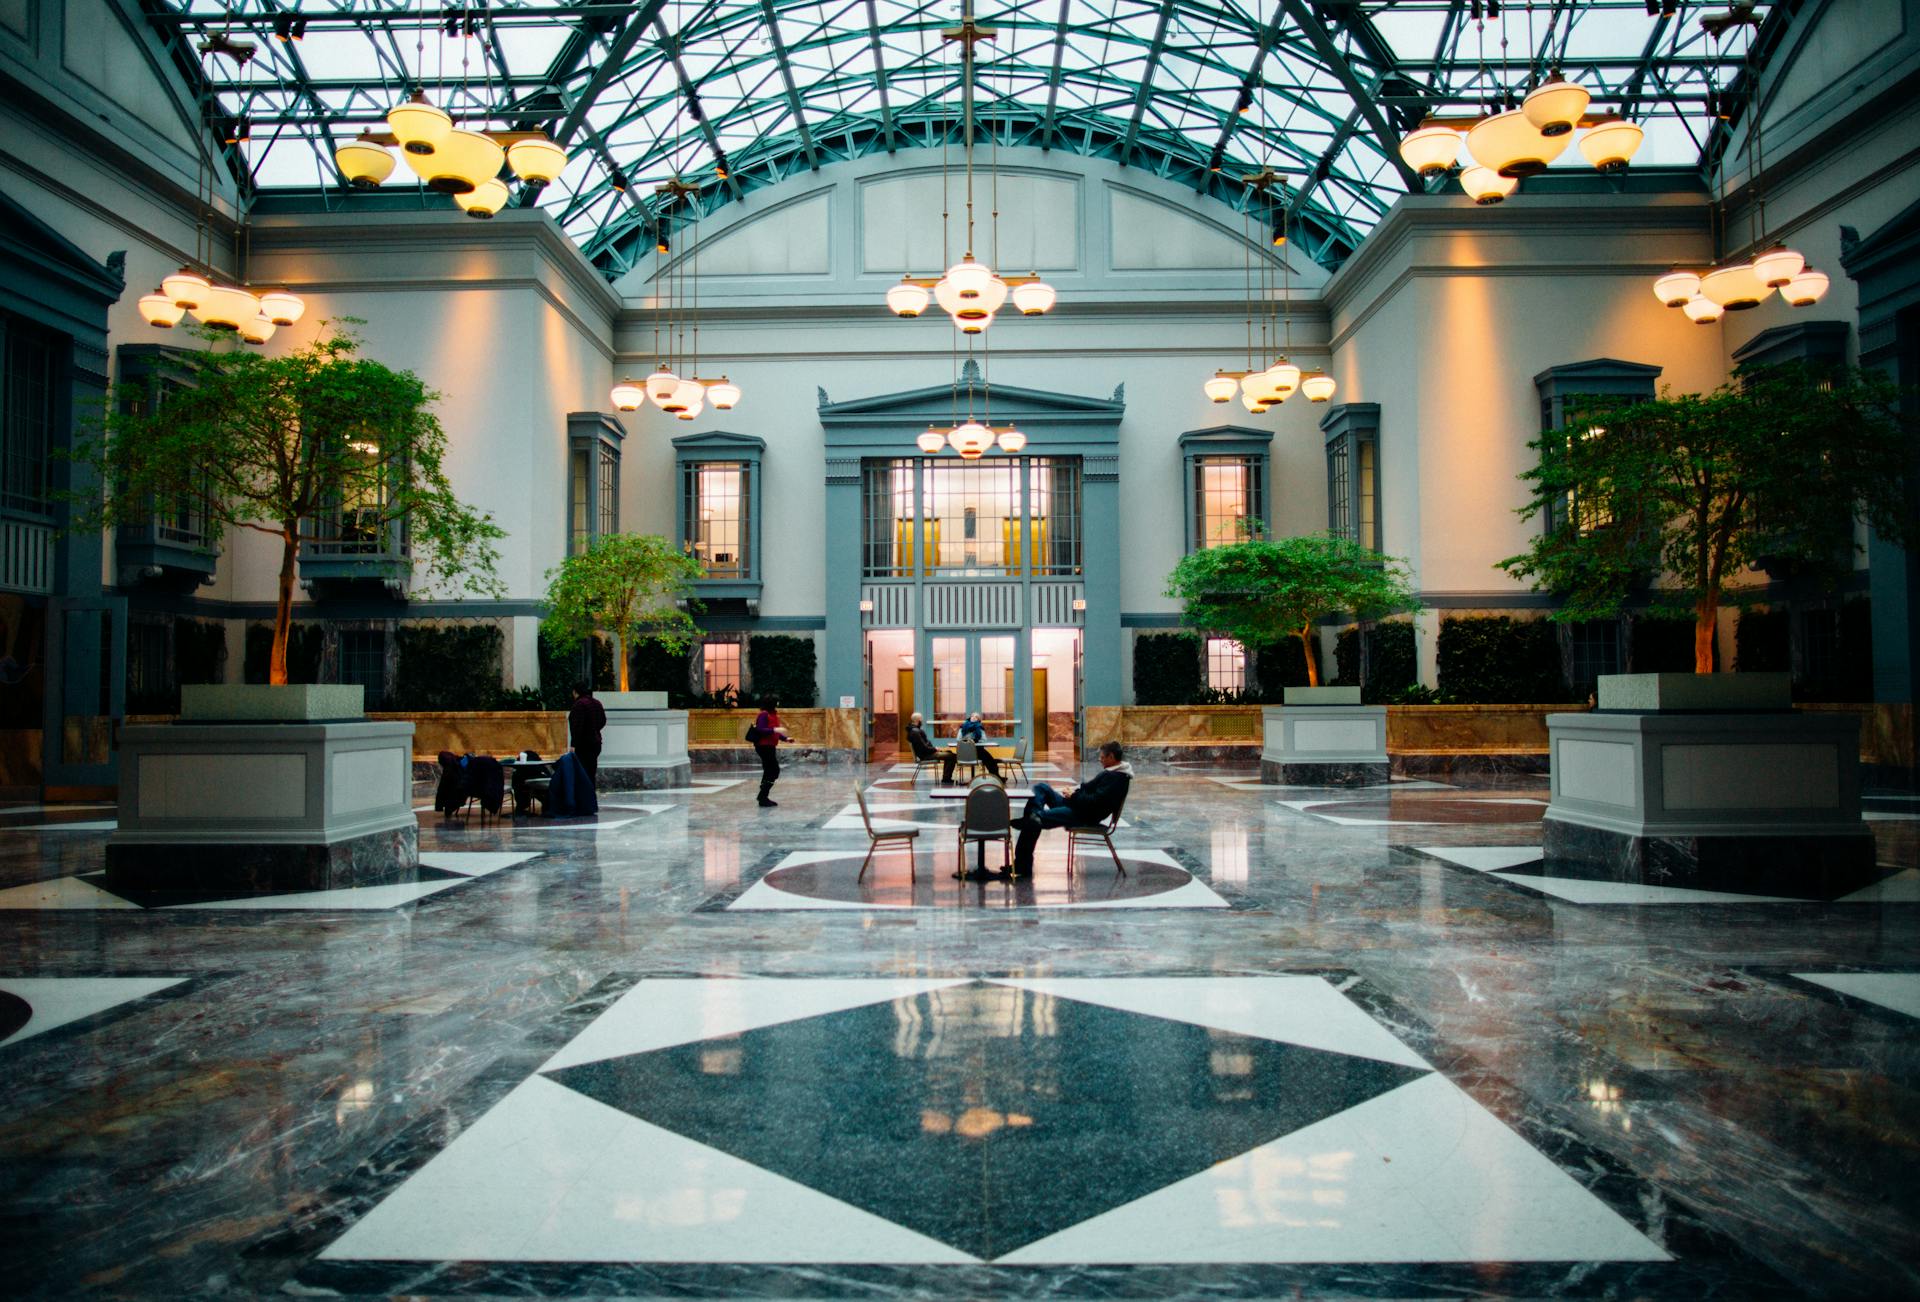 The lobby of an upmarket hotel | Source: Pexels